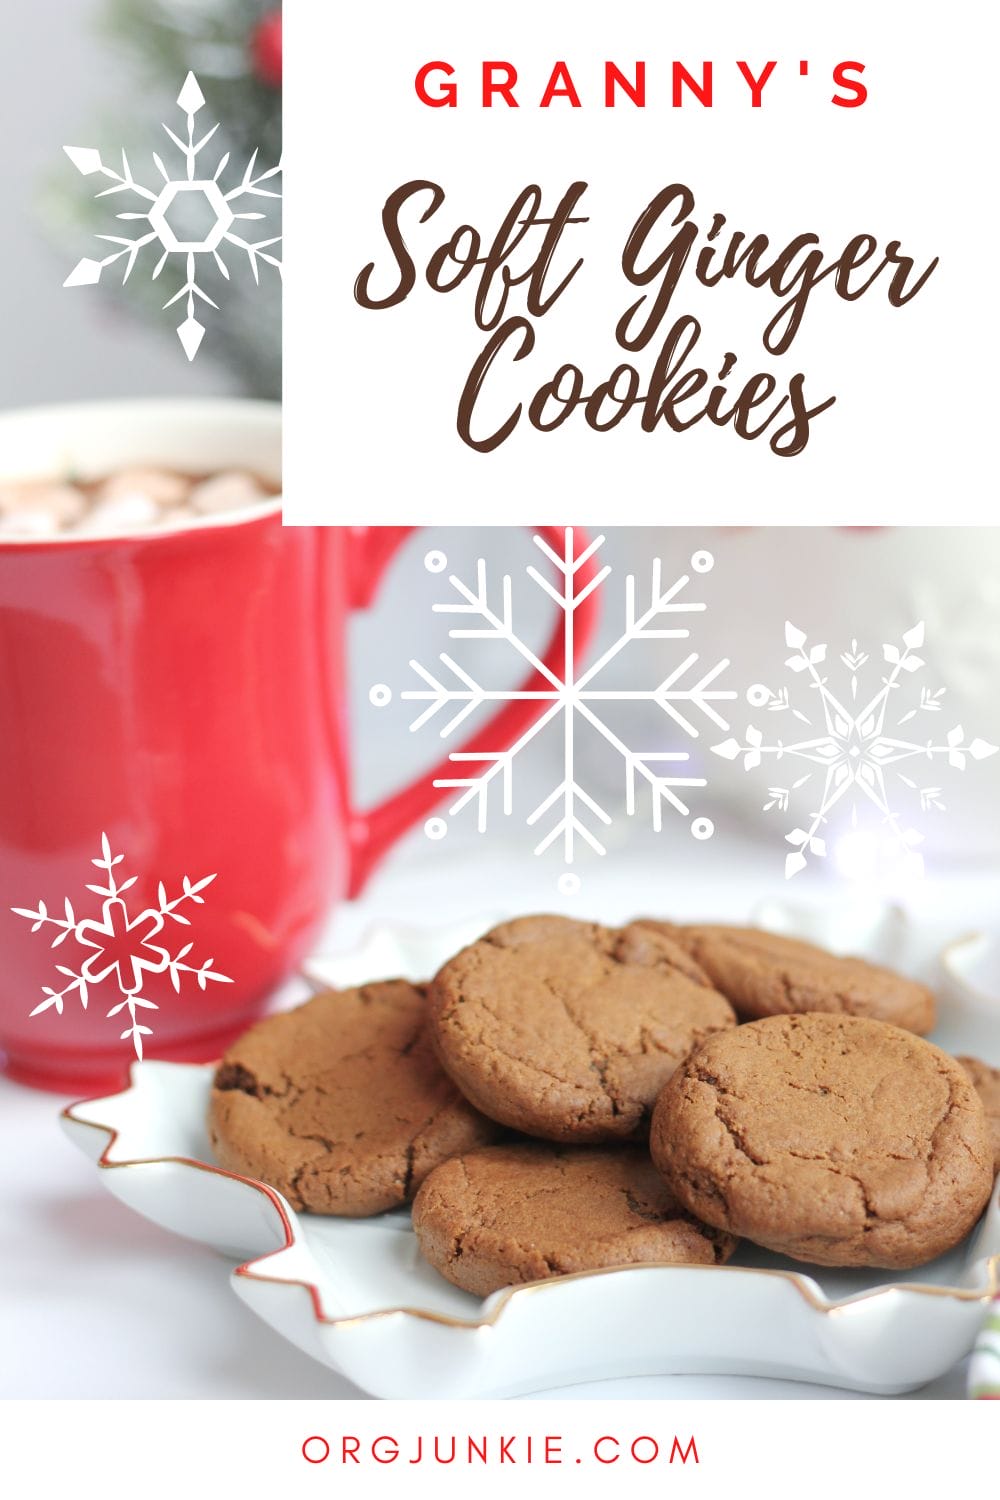 Granny's Soft Ginger Cookies